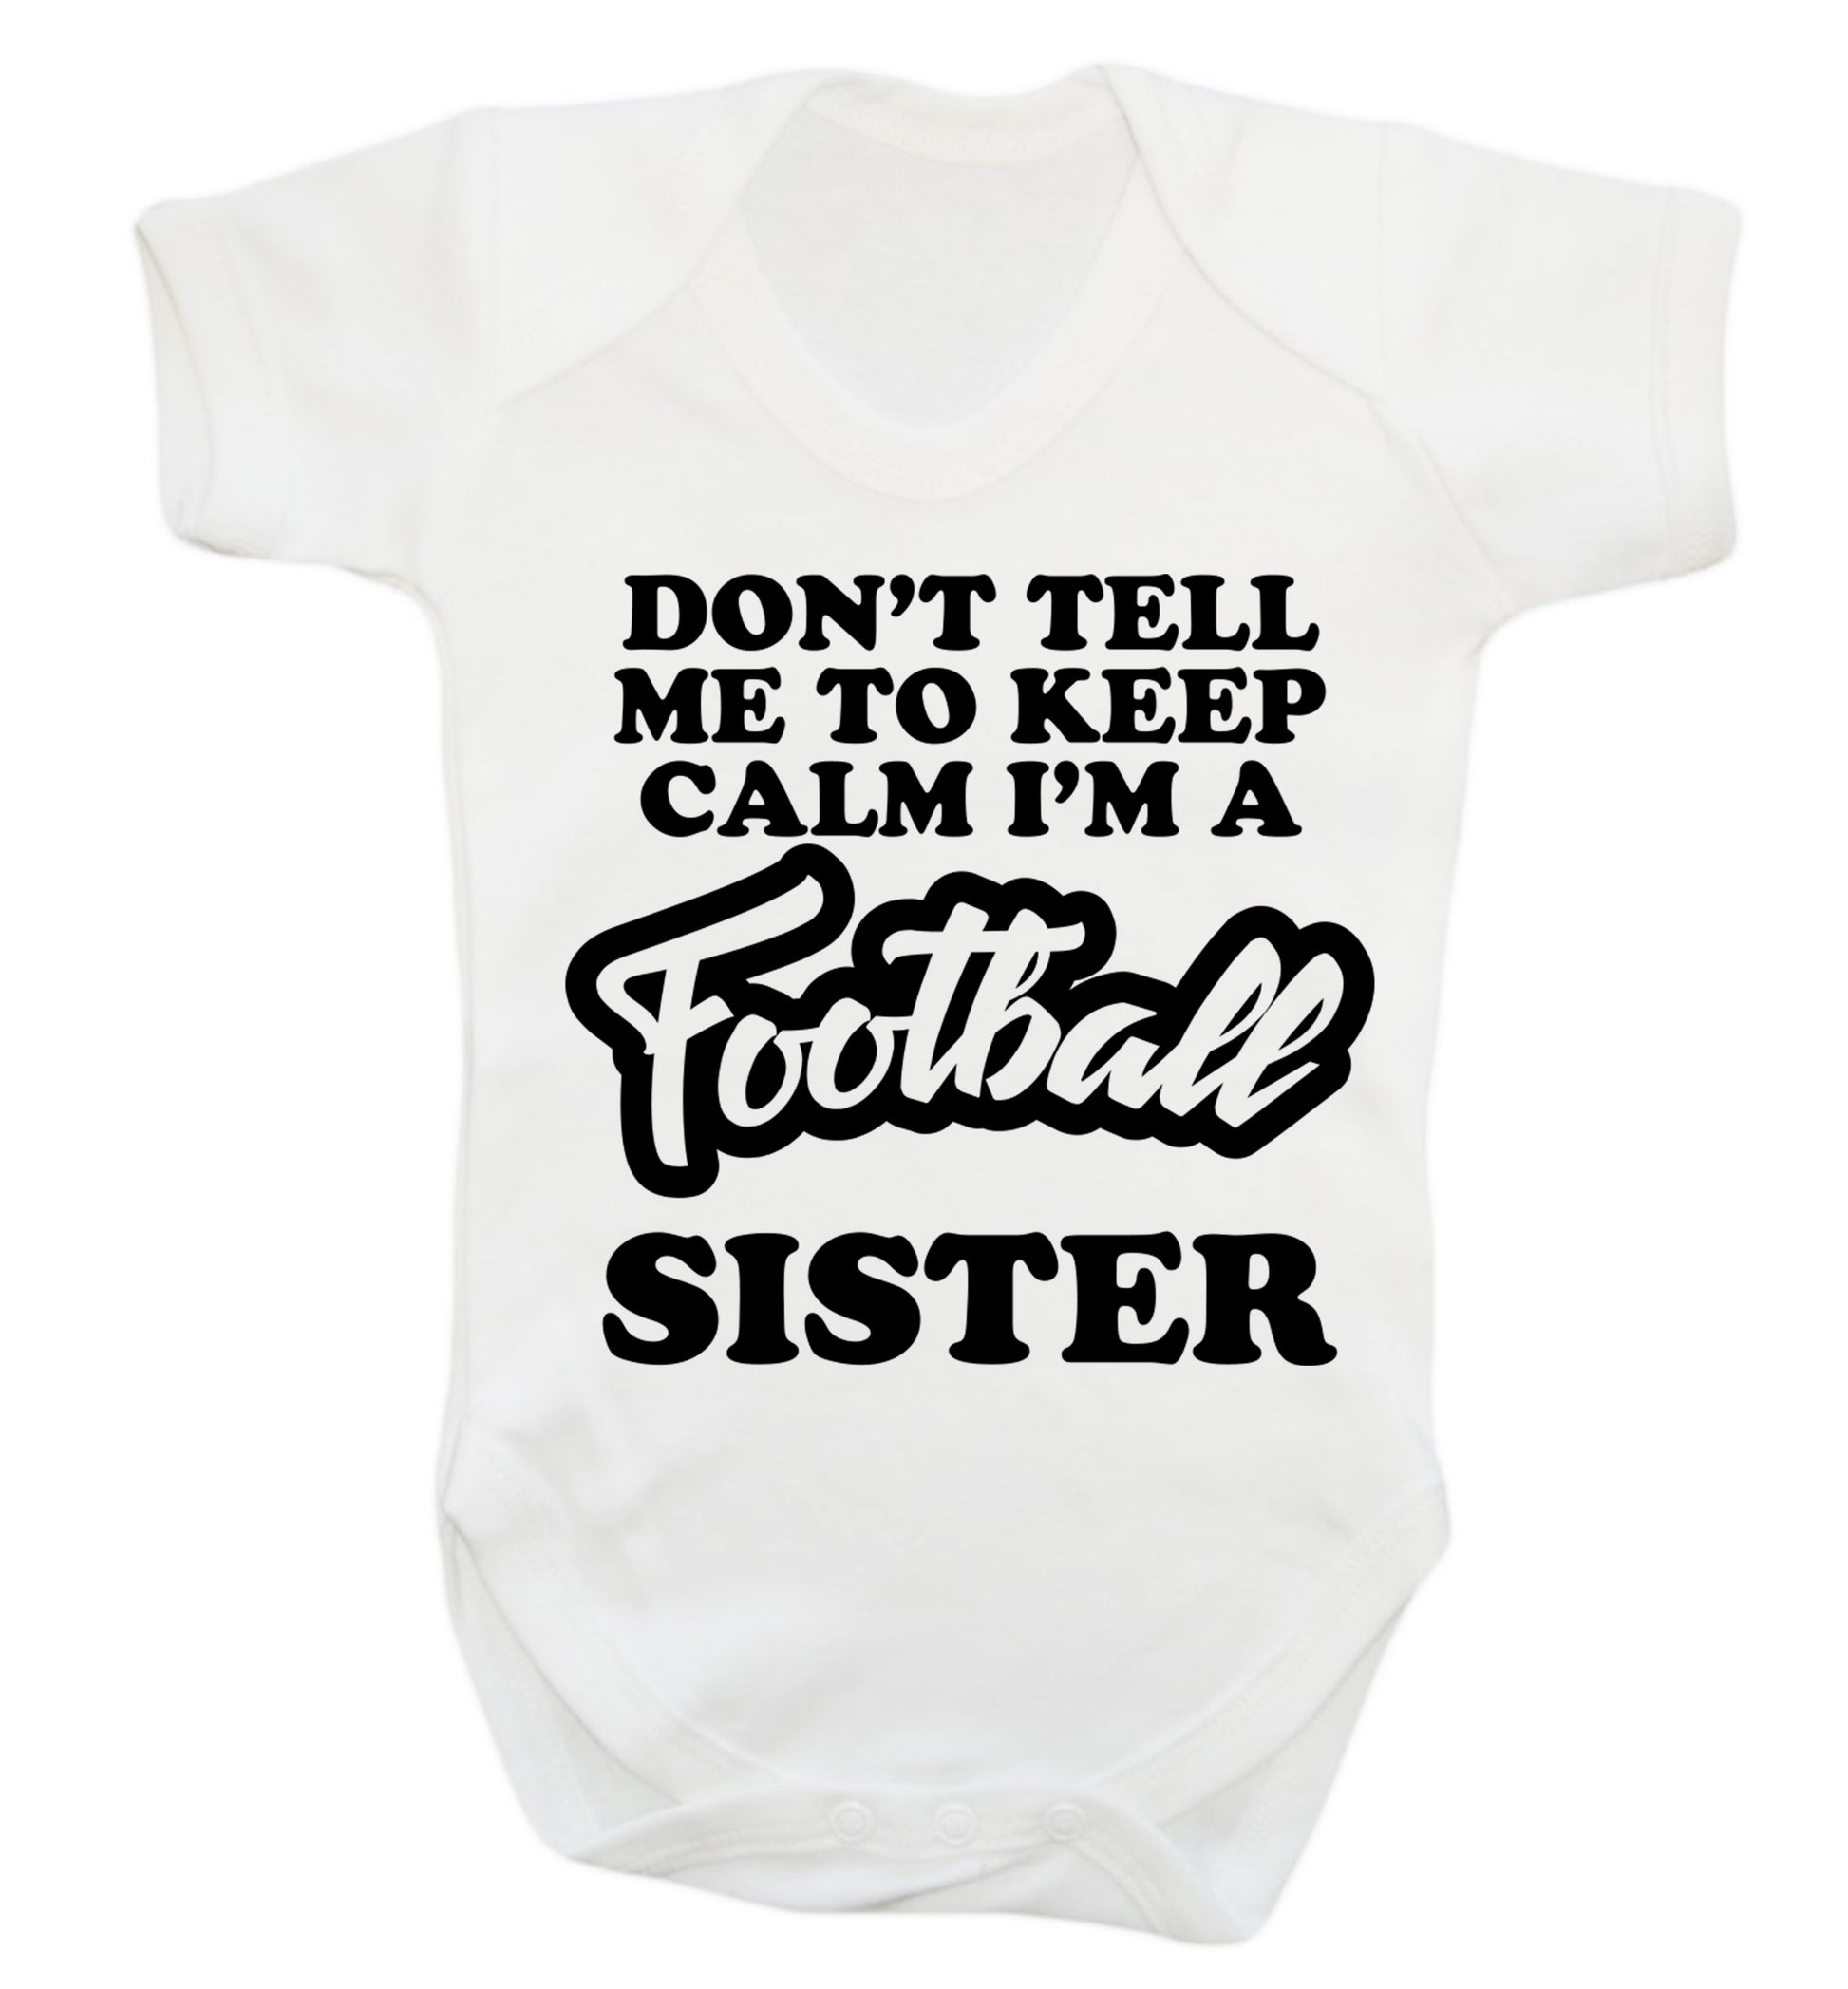 Don't tell me to keep calm I'm a football sister Baby Vest white 18-24 months